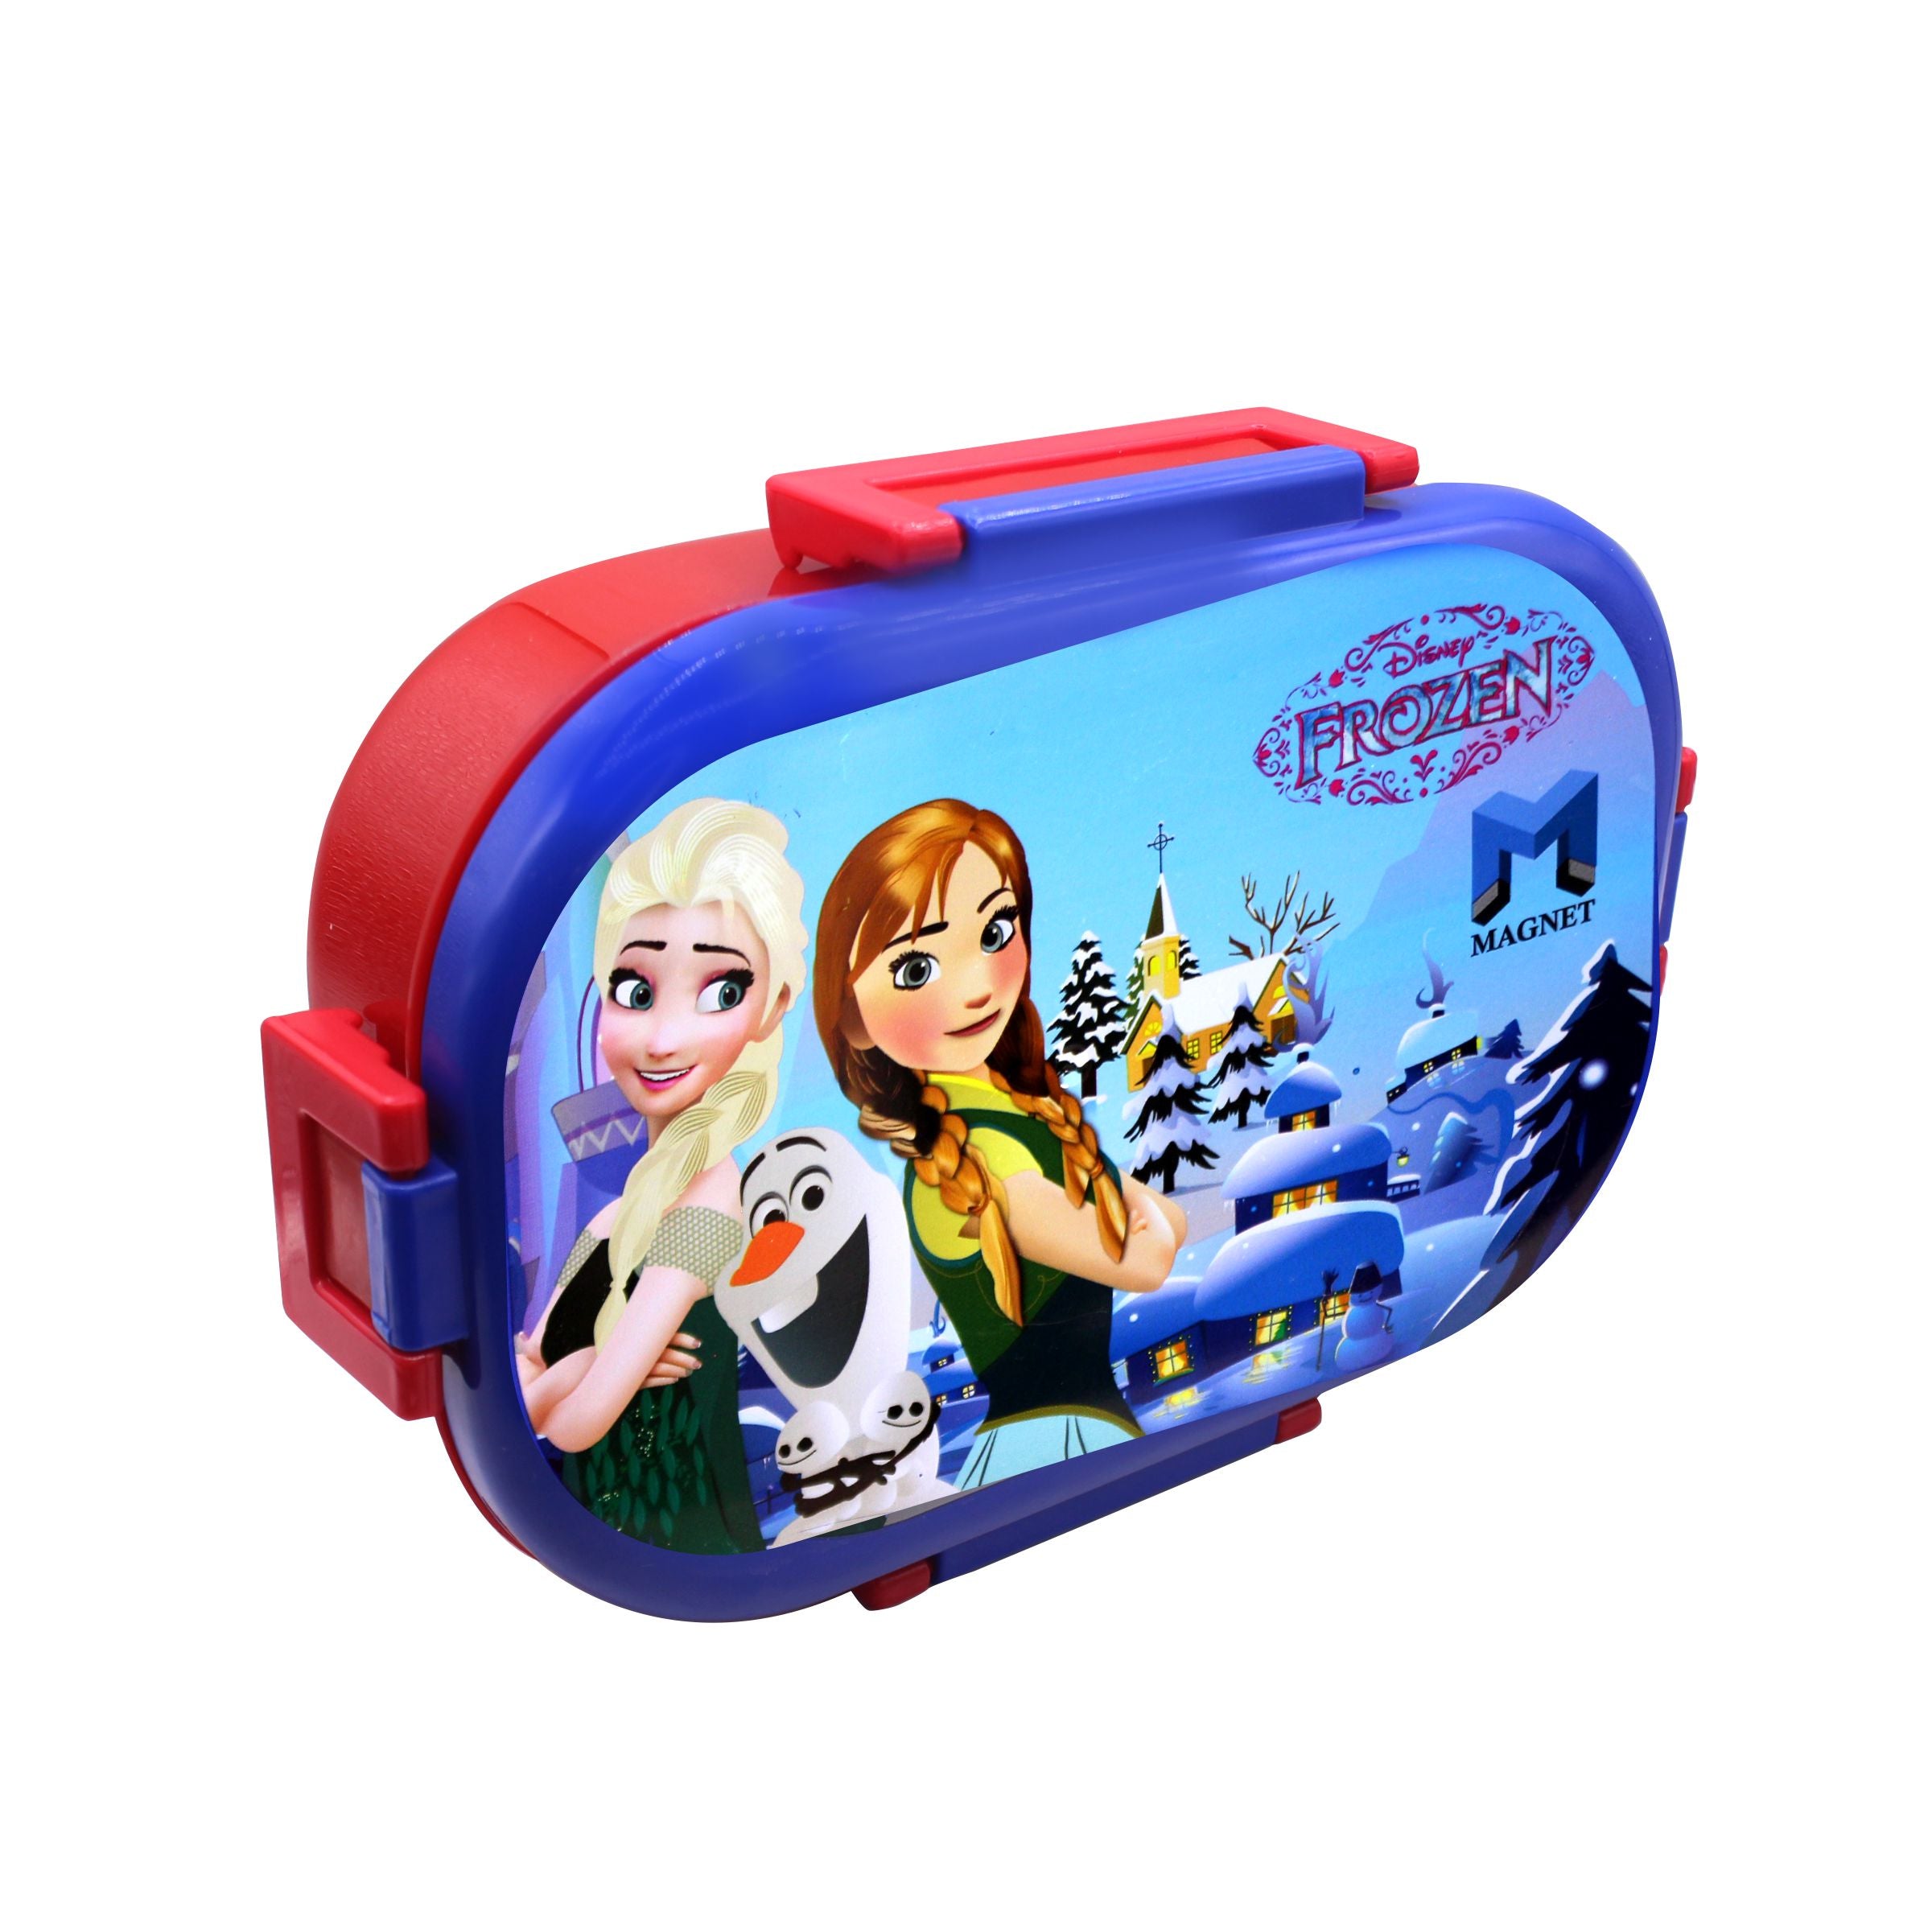 Frozen Character Premium Quality Lunch Box For Kids